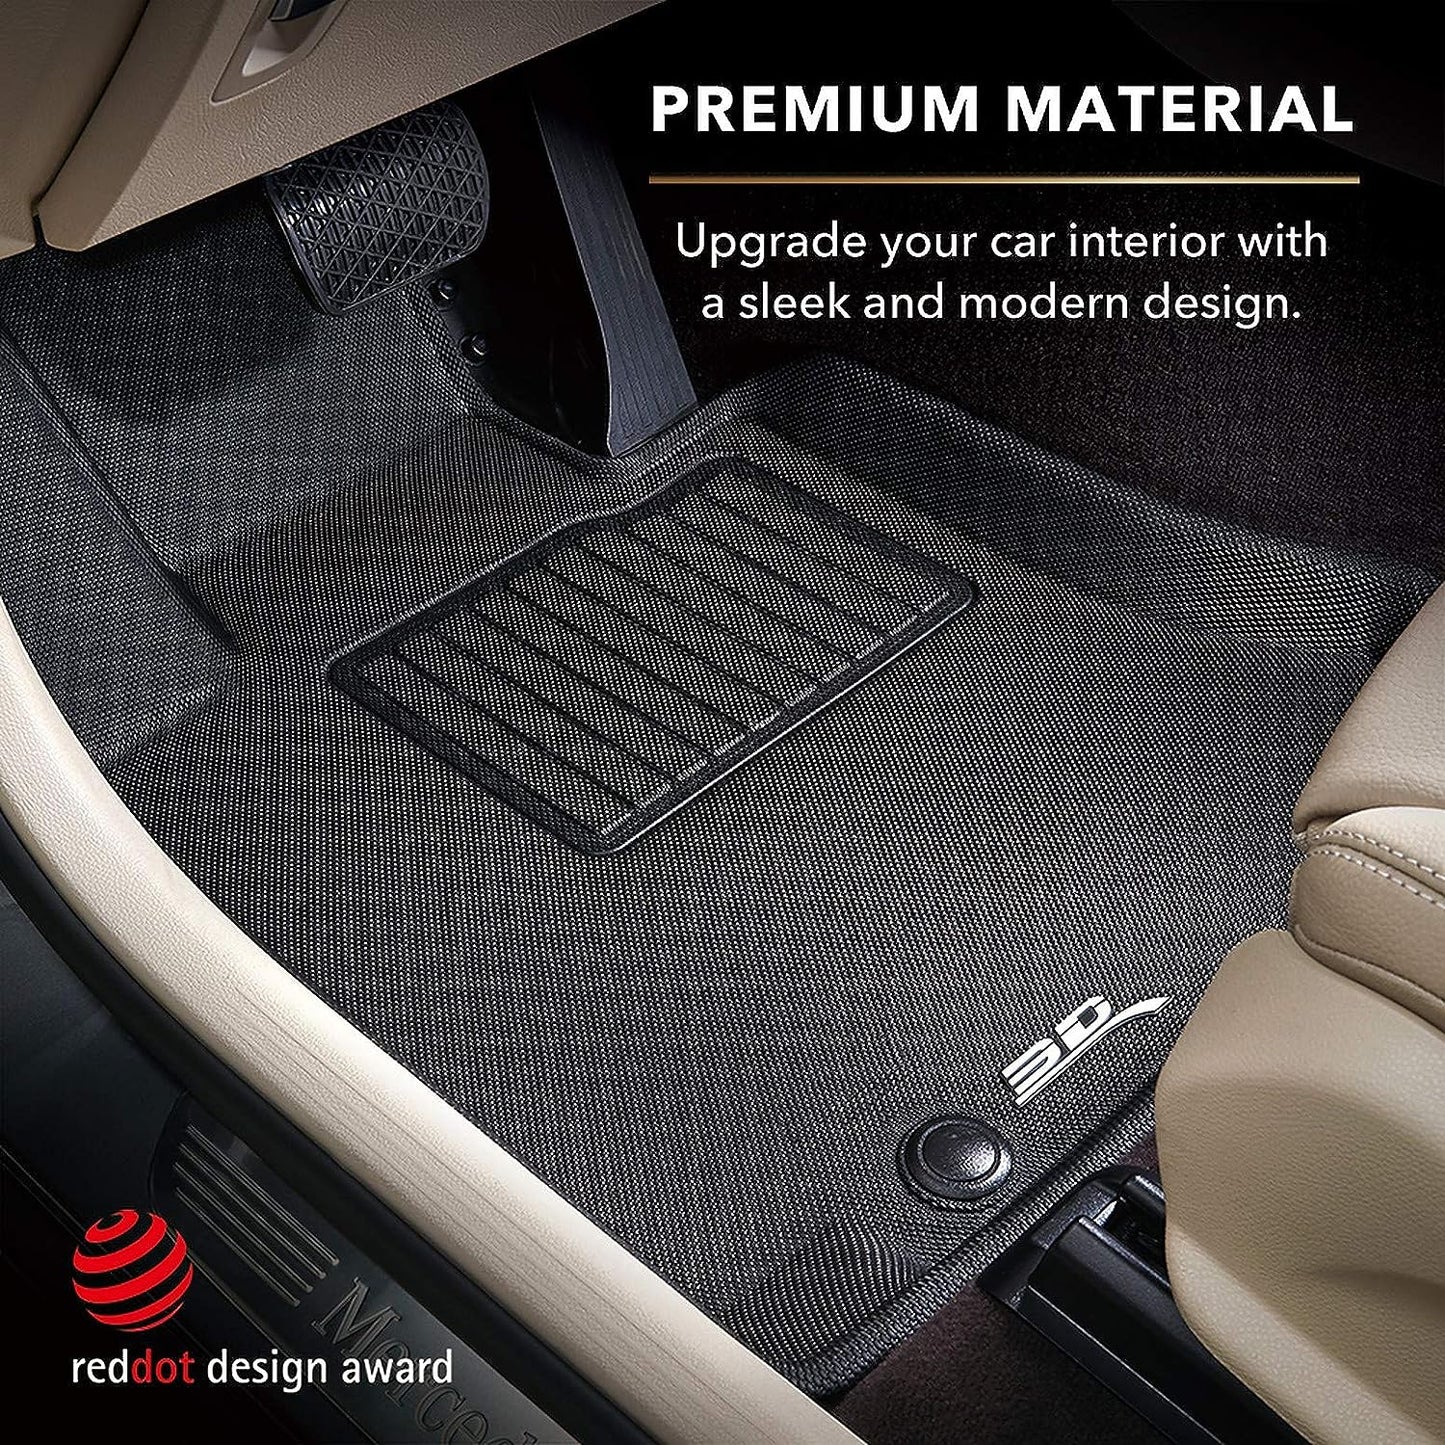 3D MAXpider Custom Fit Floor Liner Black for 2008-2013 TOYOTA HIGHLANDER, Gas Models, 1st and 2nd Rows